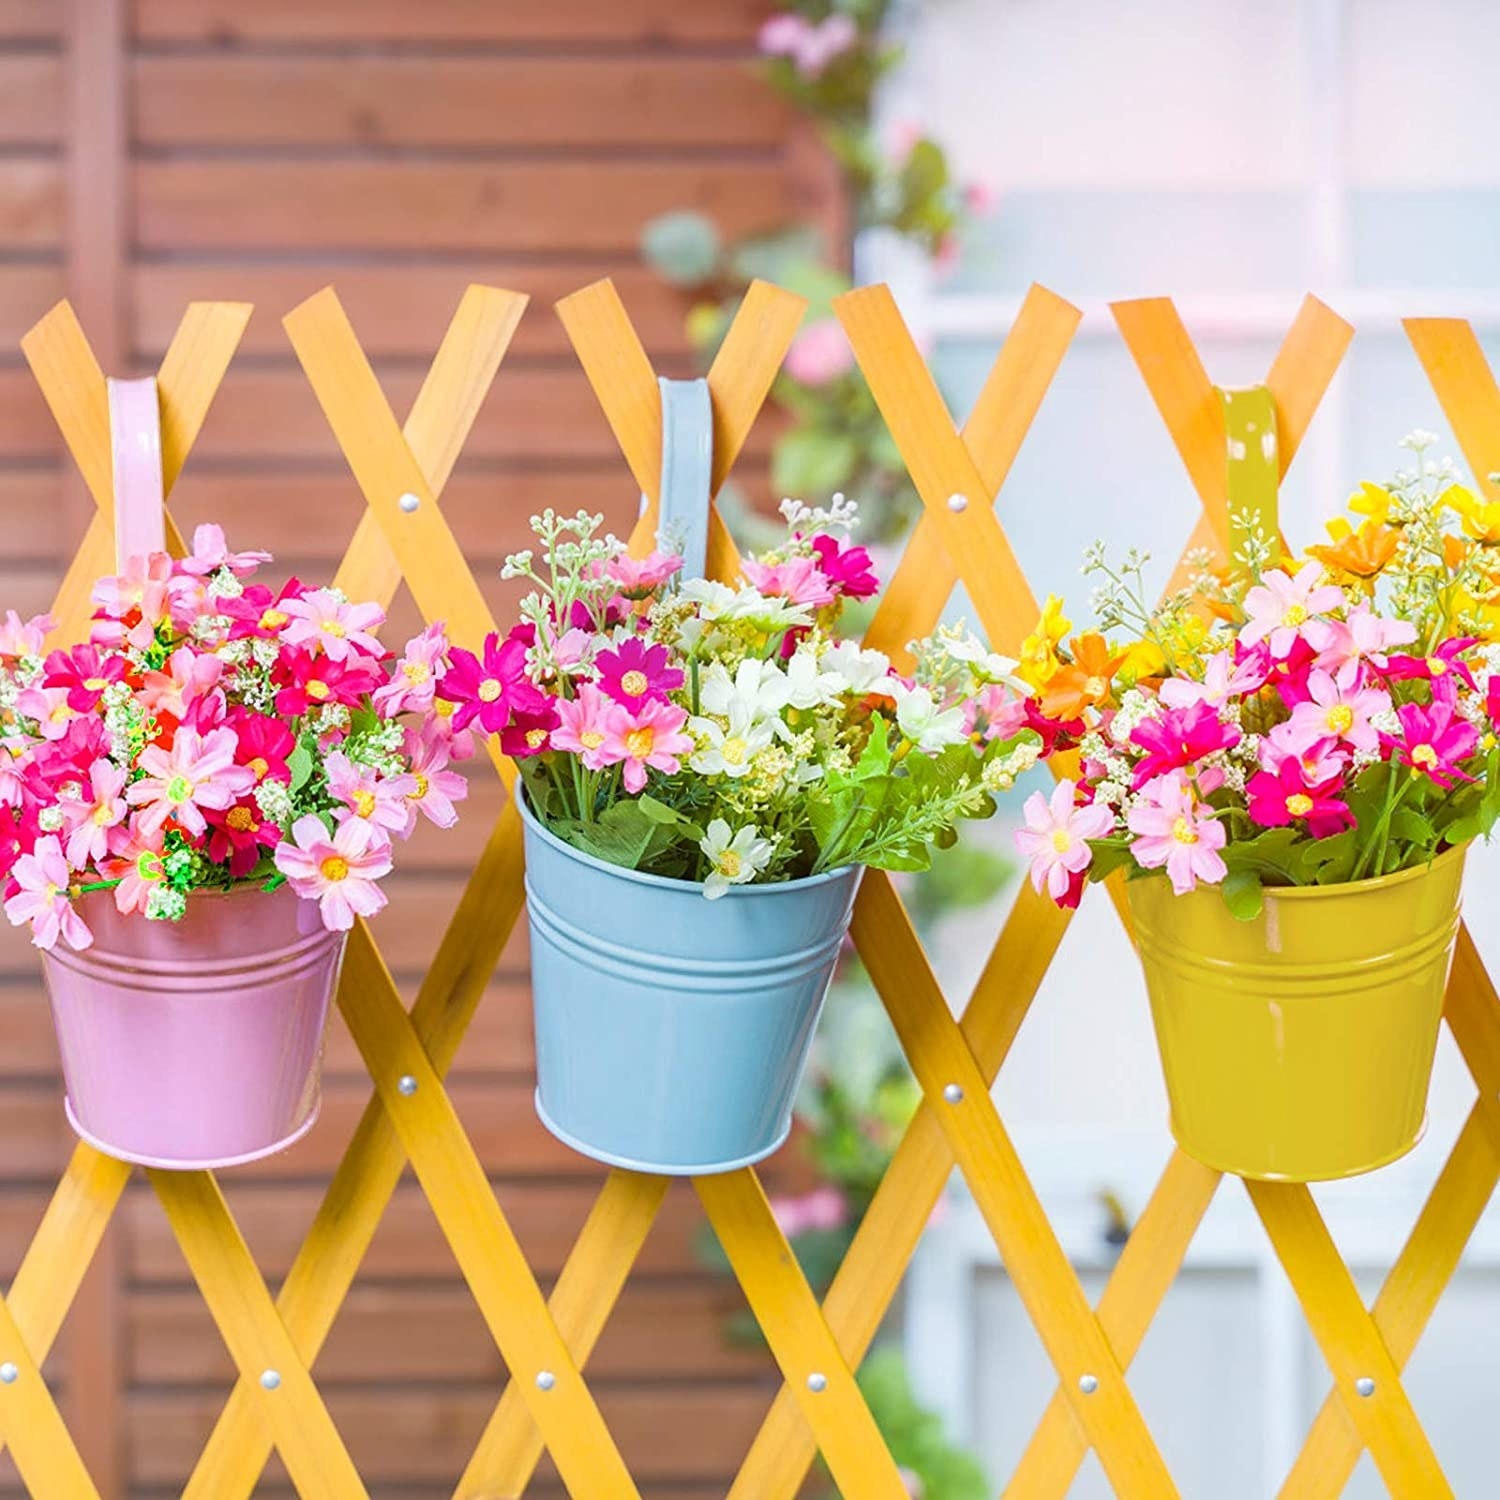 the flower pots with flowers in them hanging from a fence